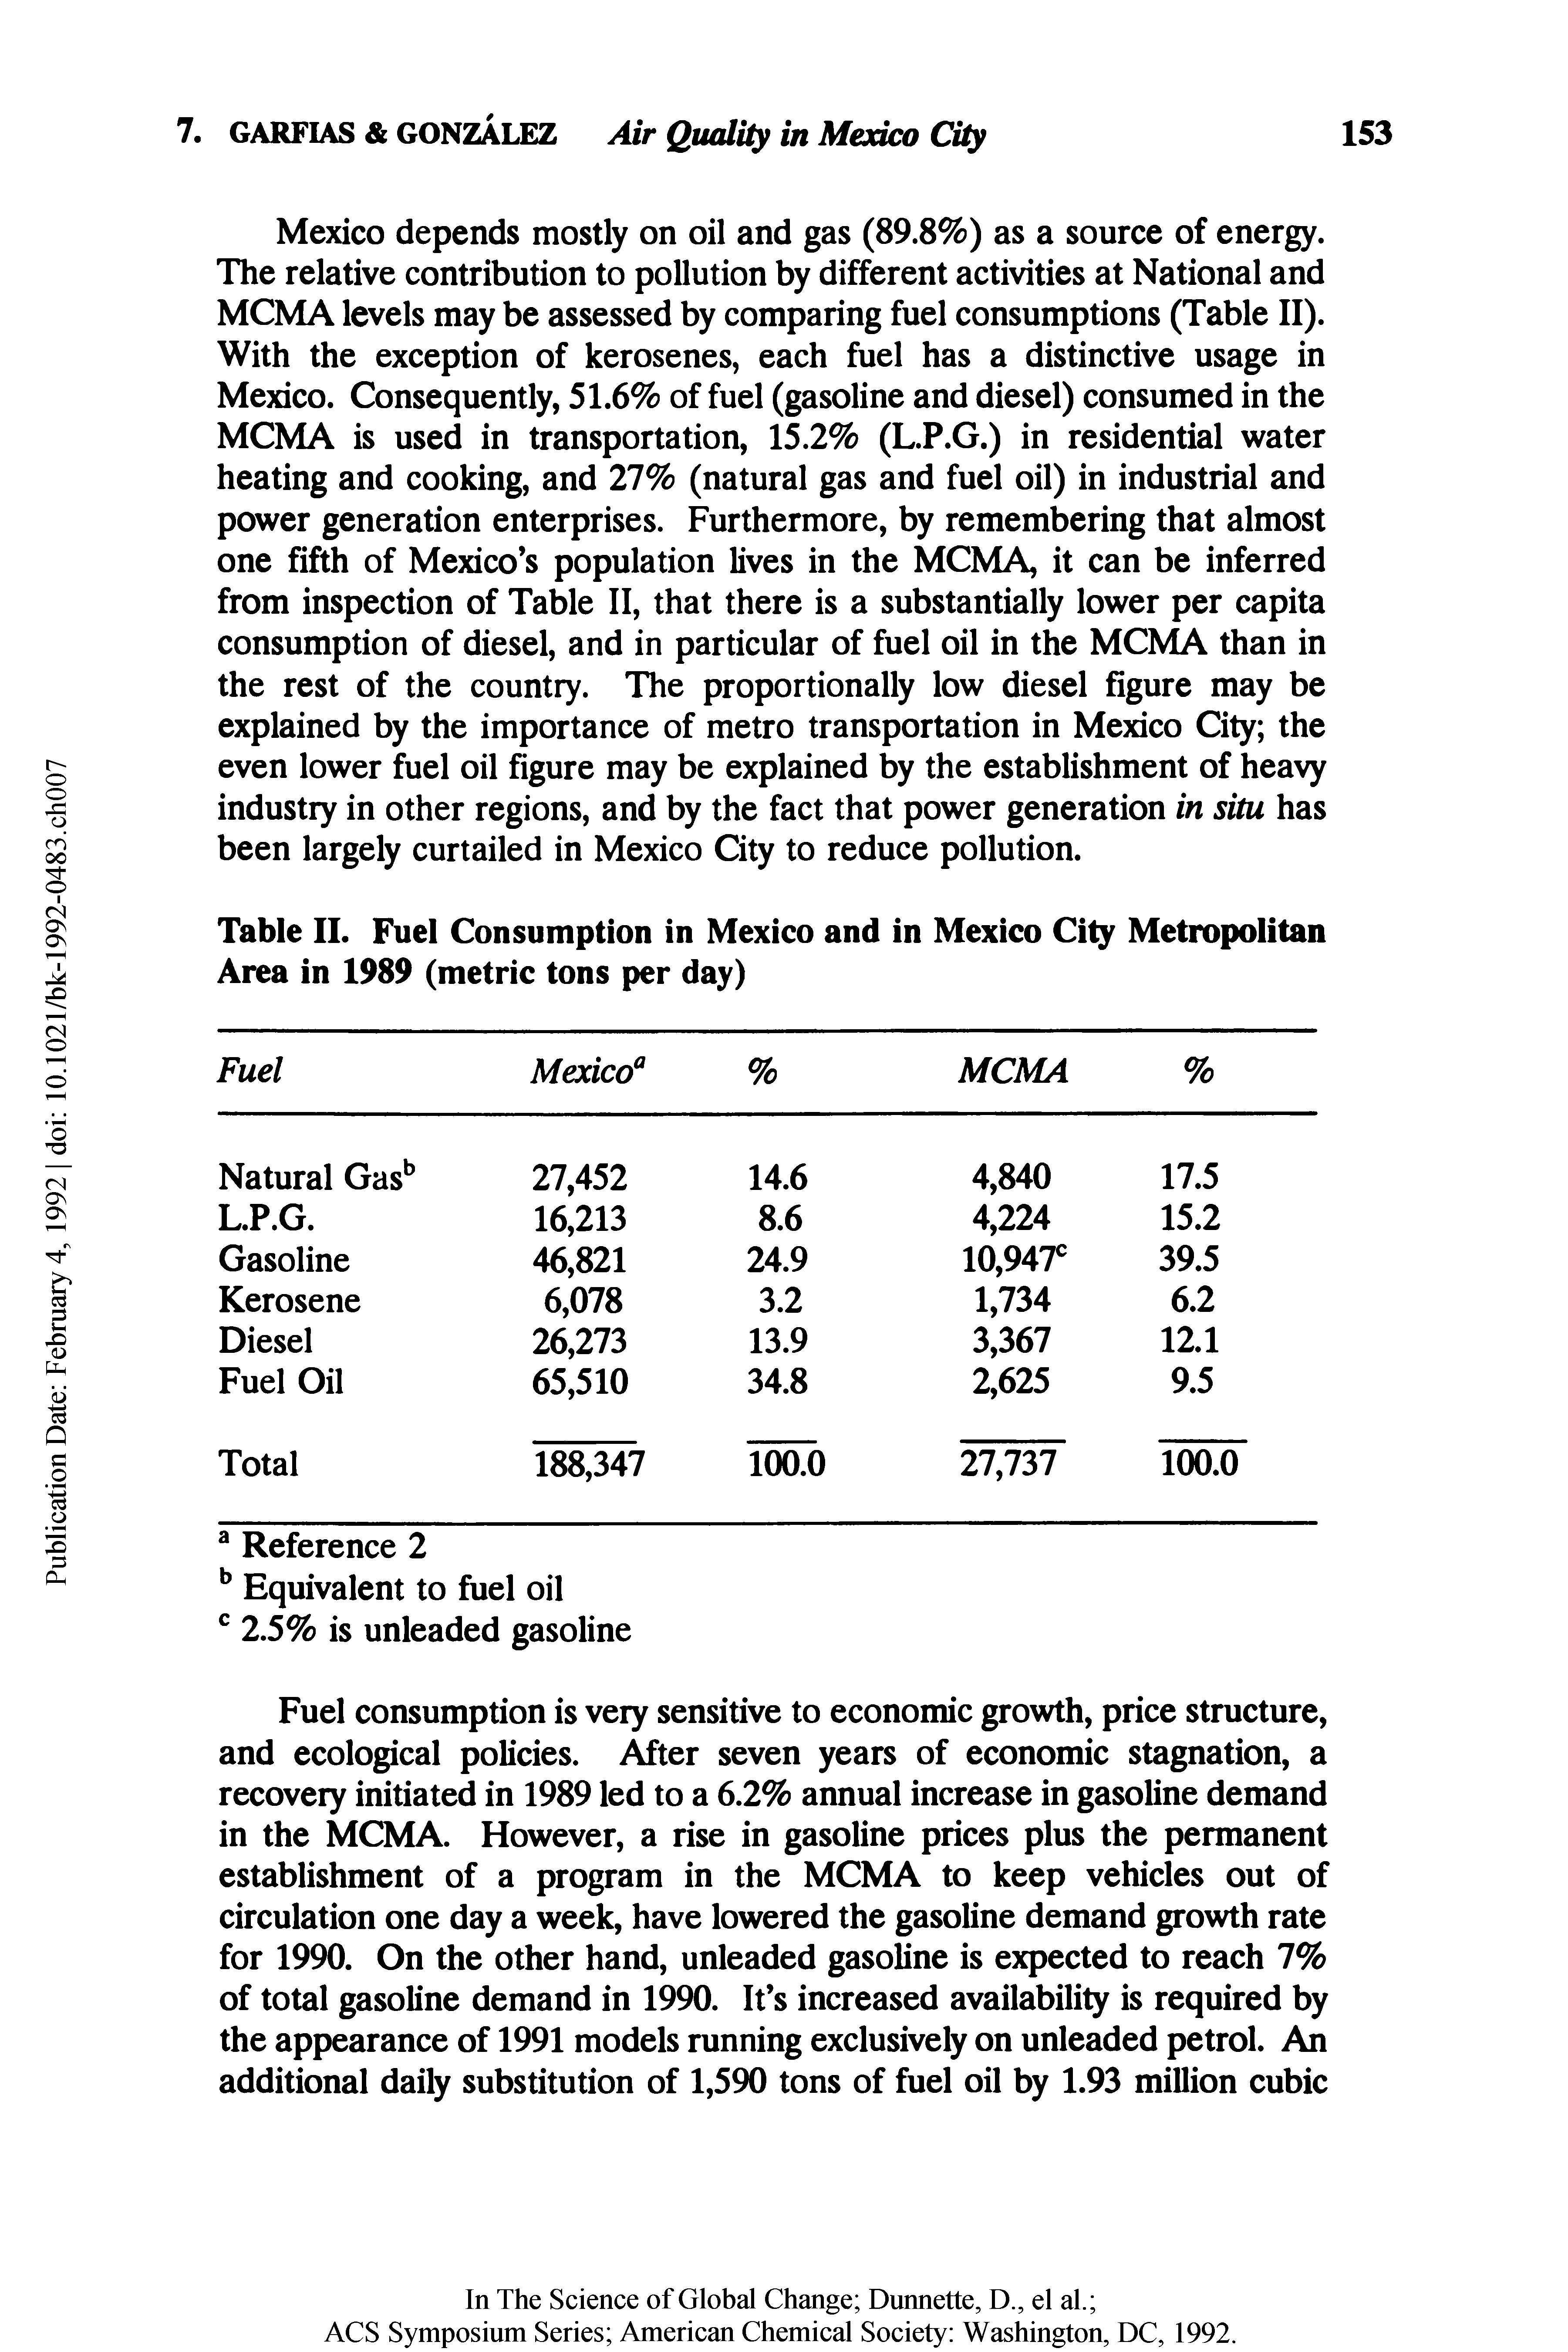 Table II. Fuel Consumption in Mexico and in Mexico City Metropolitan Area in 1989 (metric tons per day)...